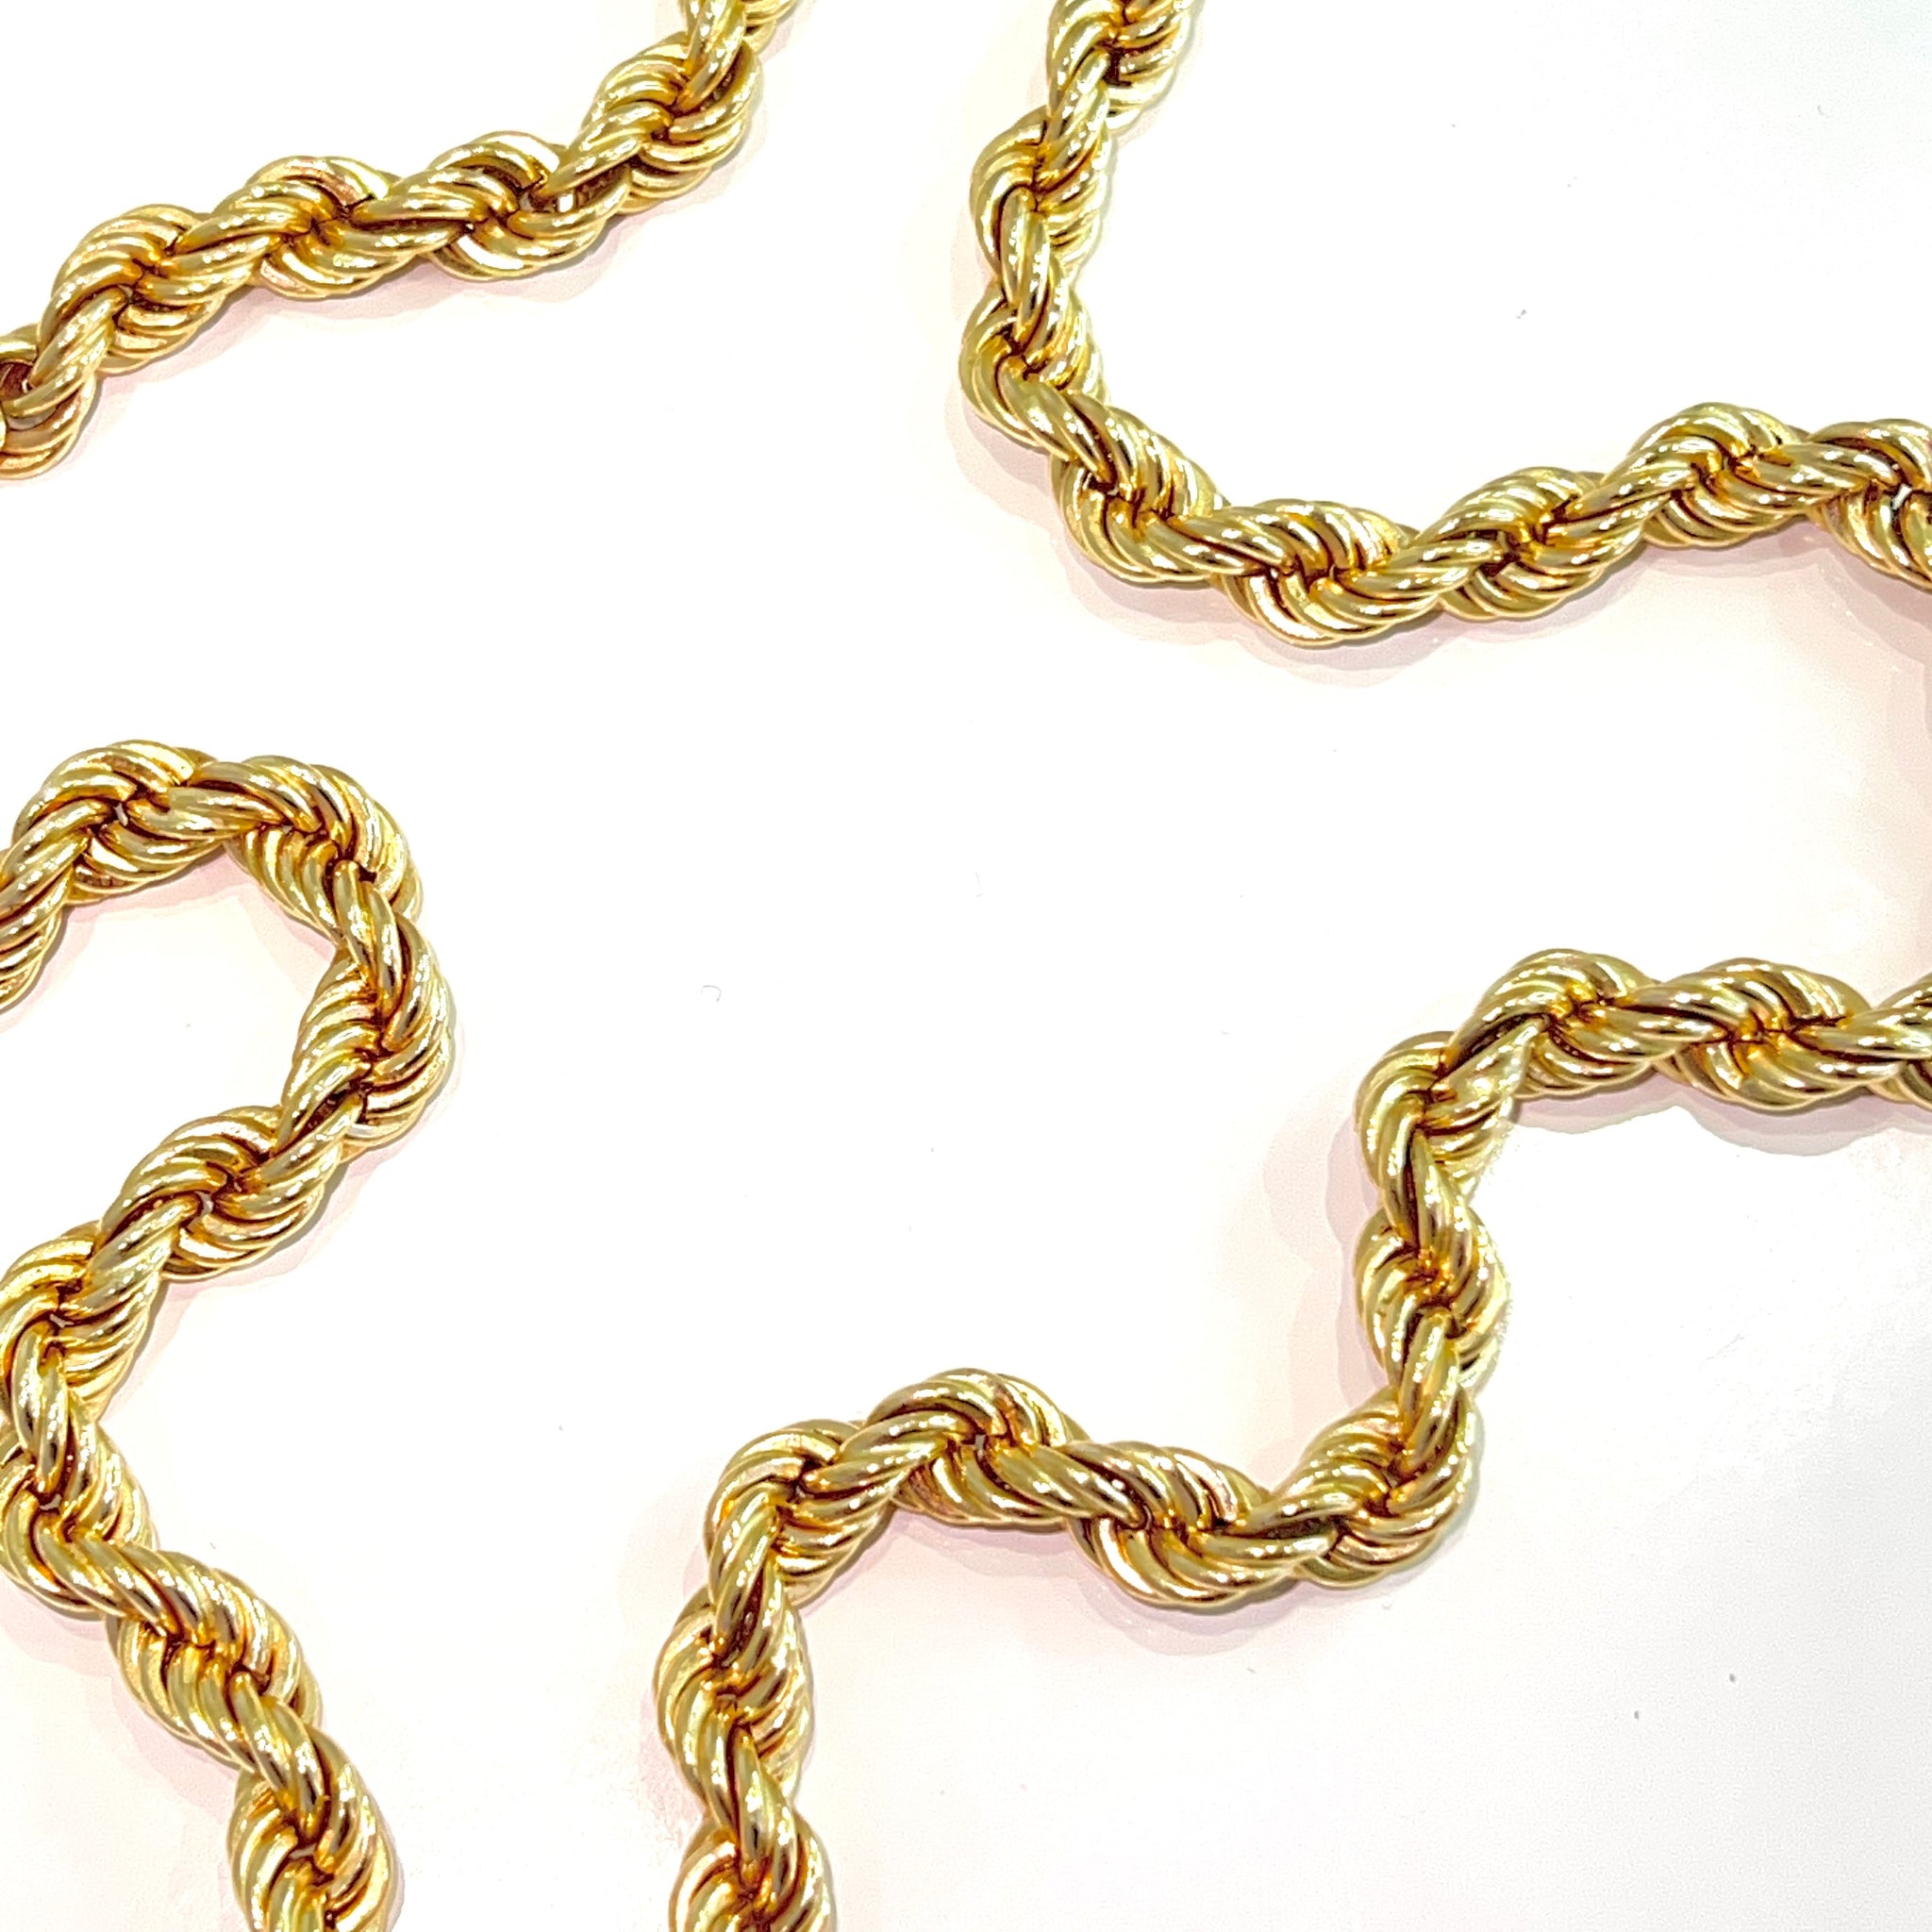 Rope Chain - 14 carat gold - 55cm / 7mm